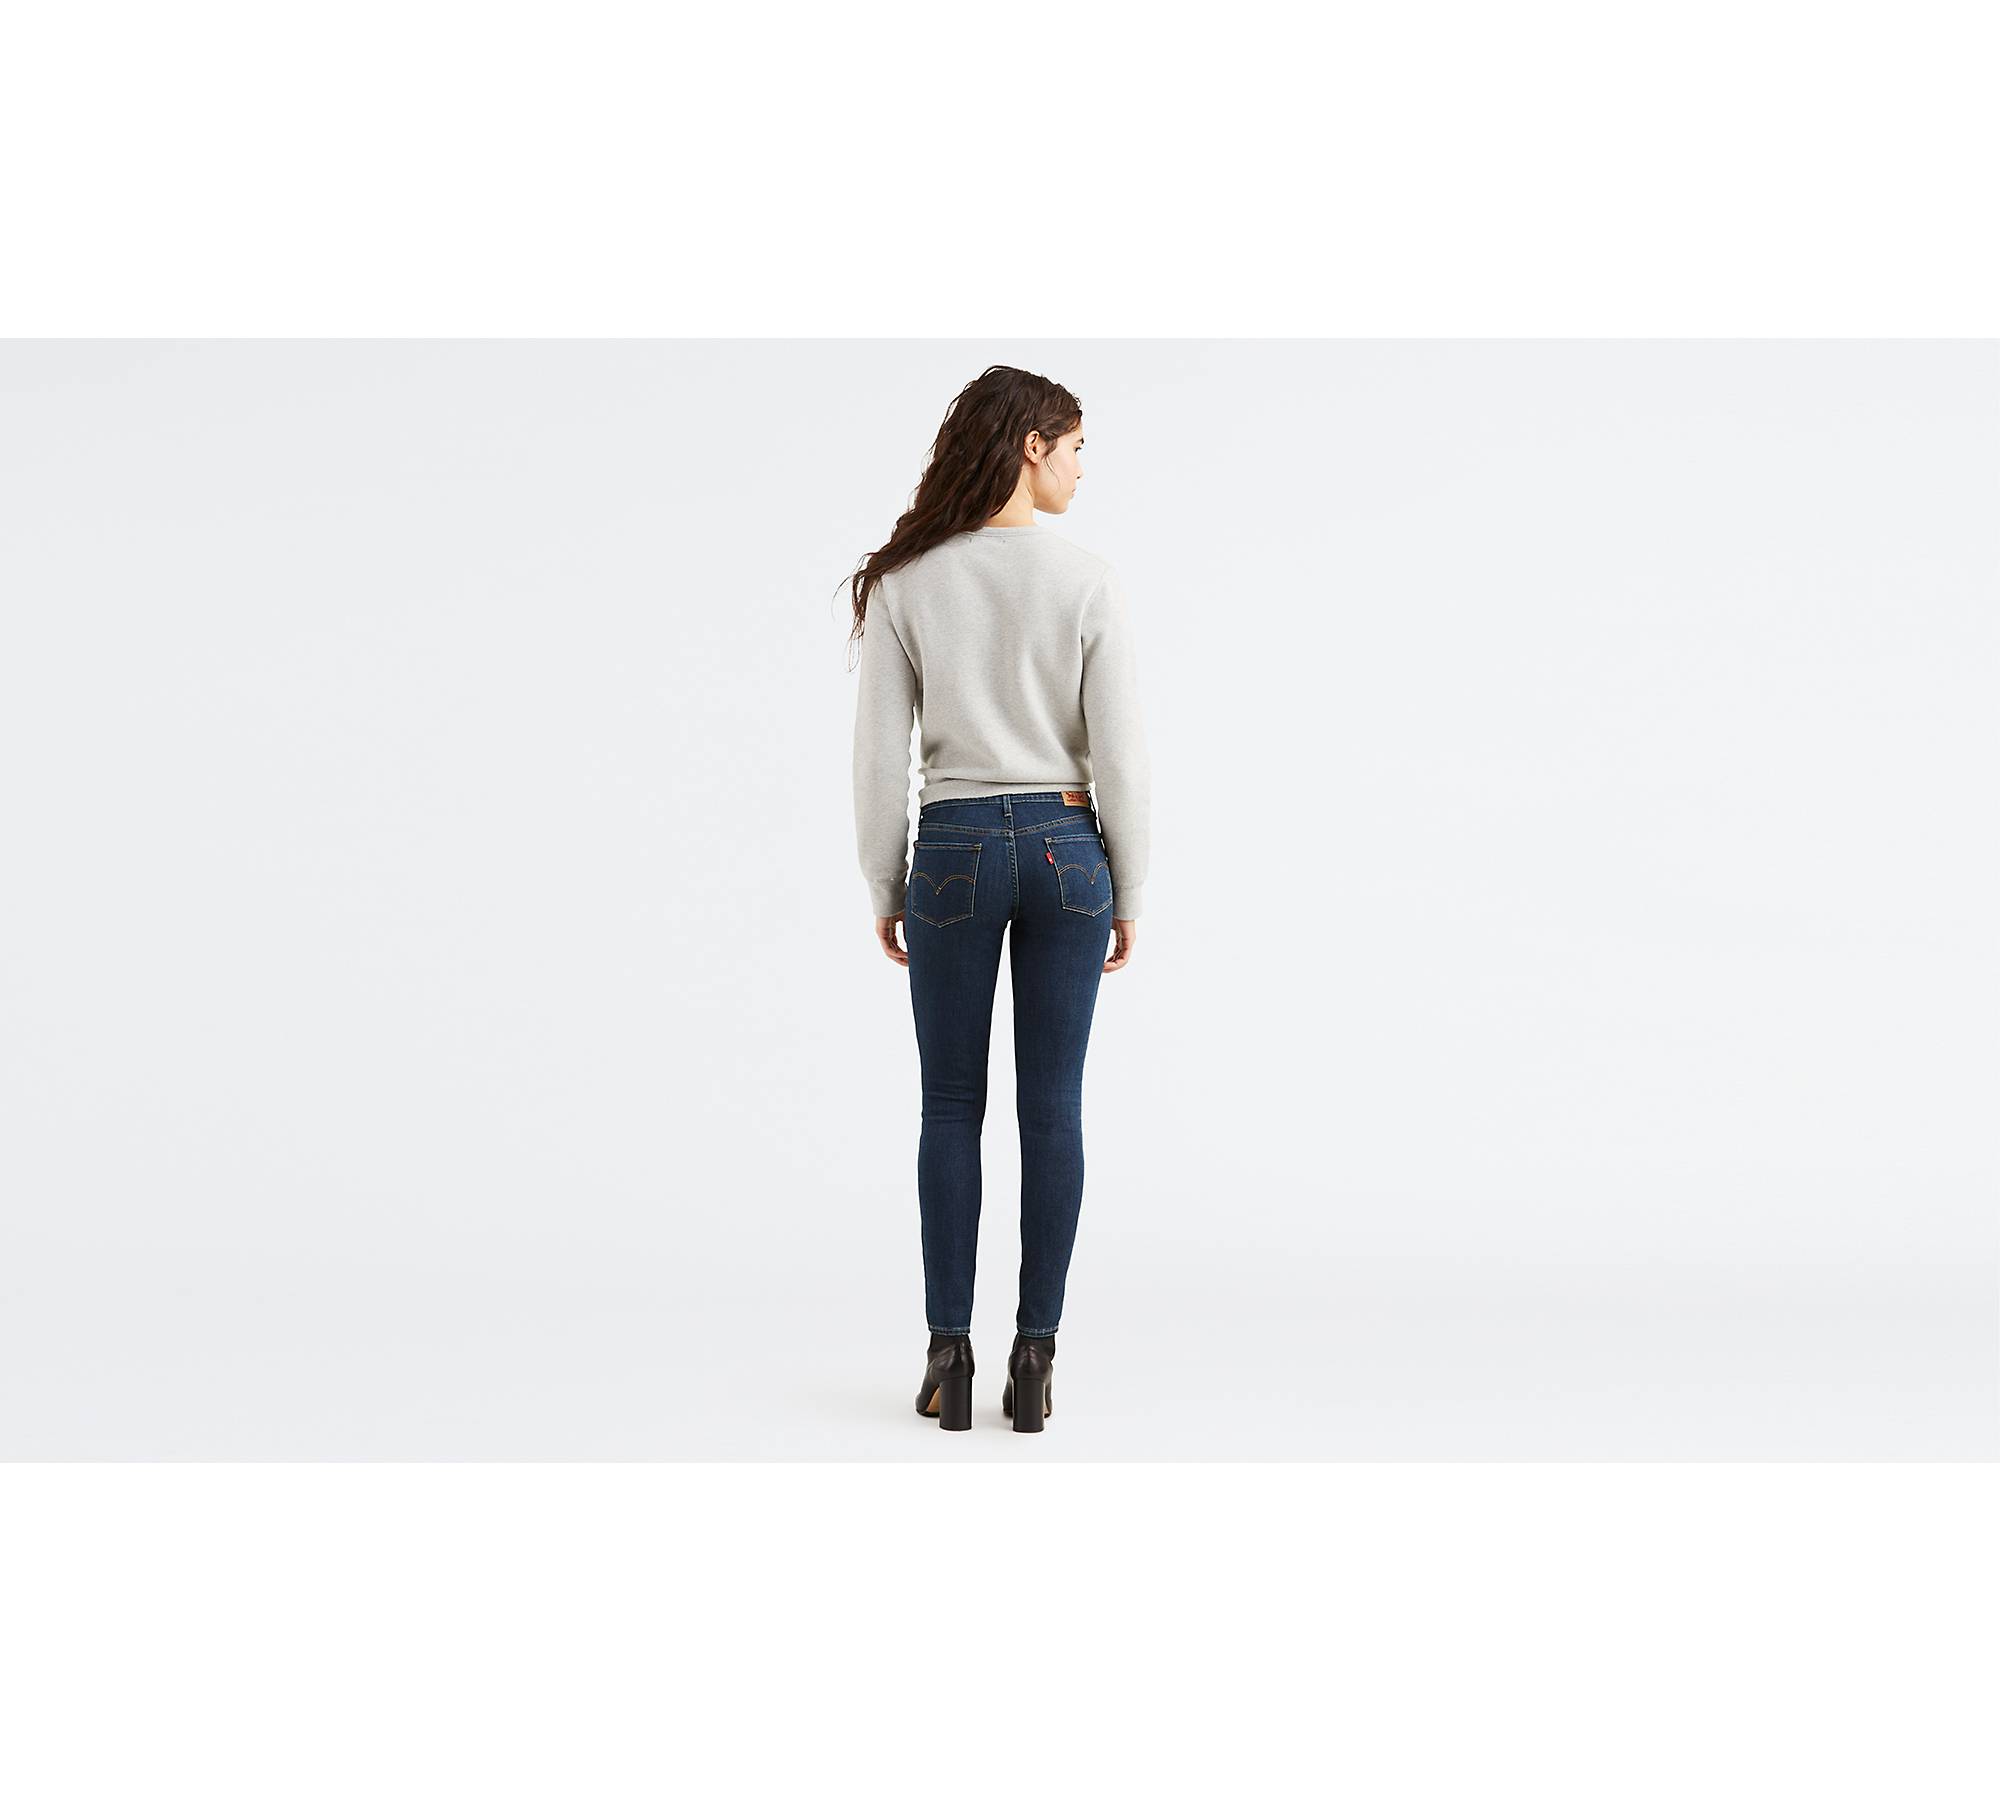 711 Embroidered Skinny Women's Jeans - Dark Wash | Levi's® US